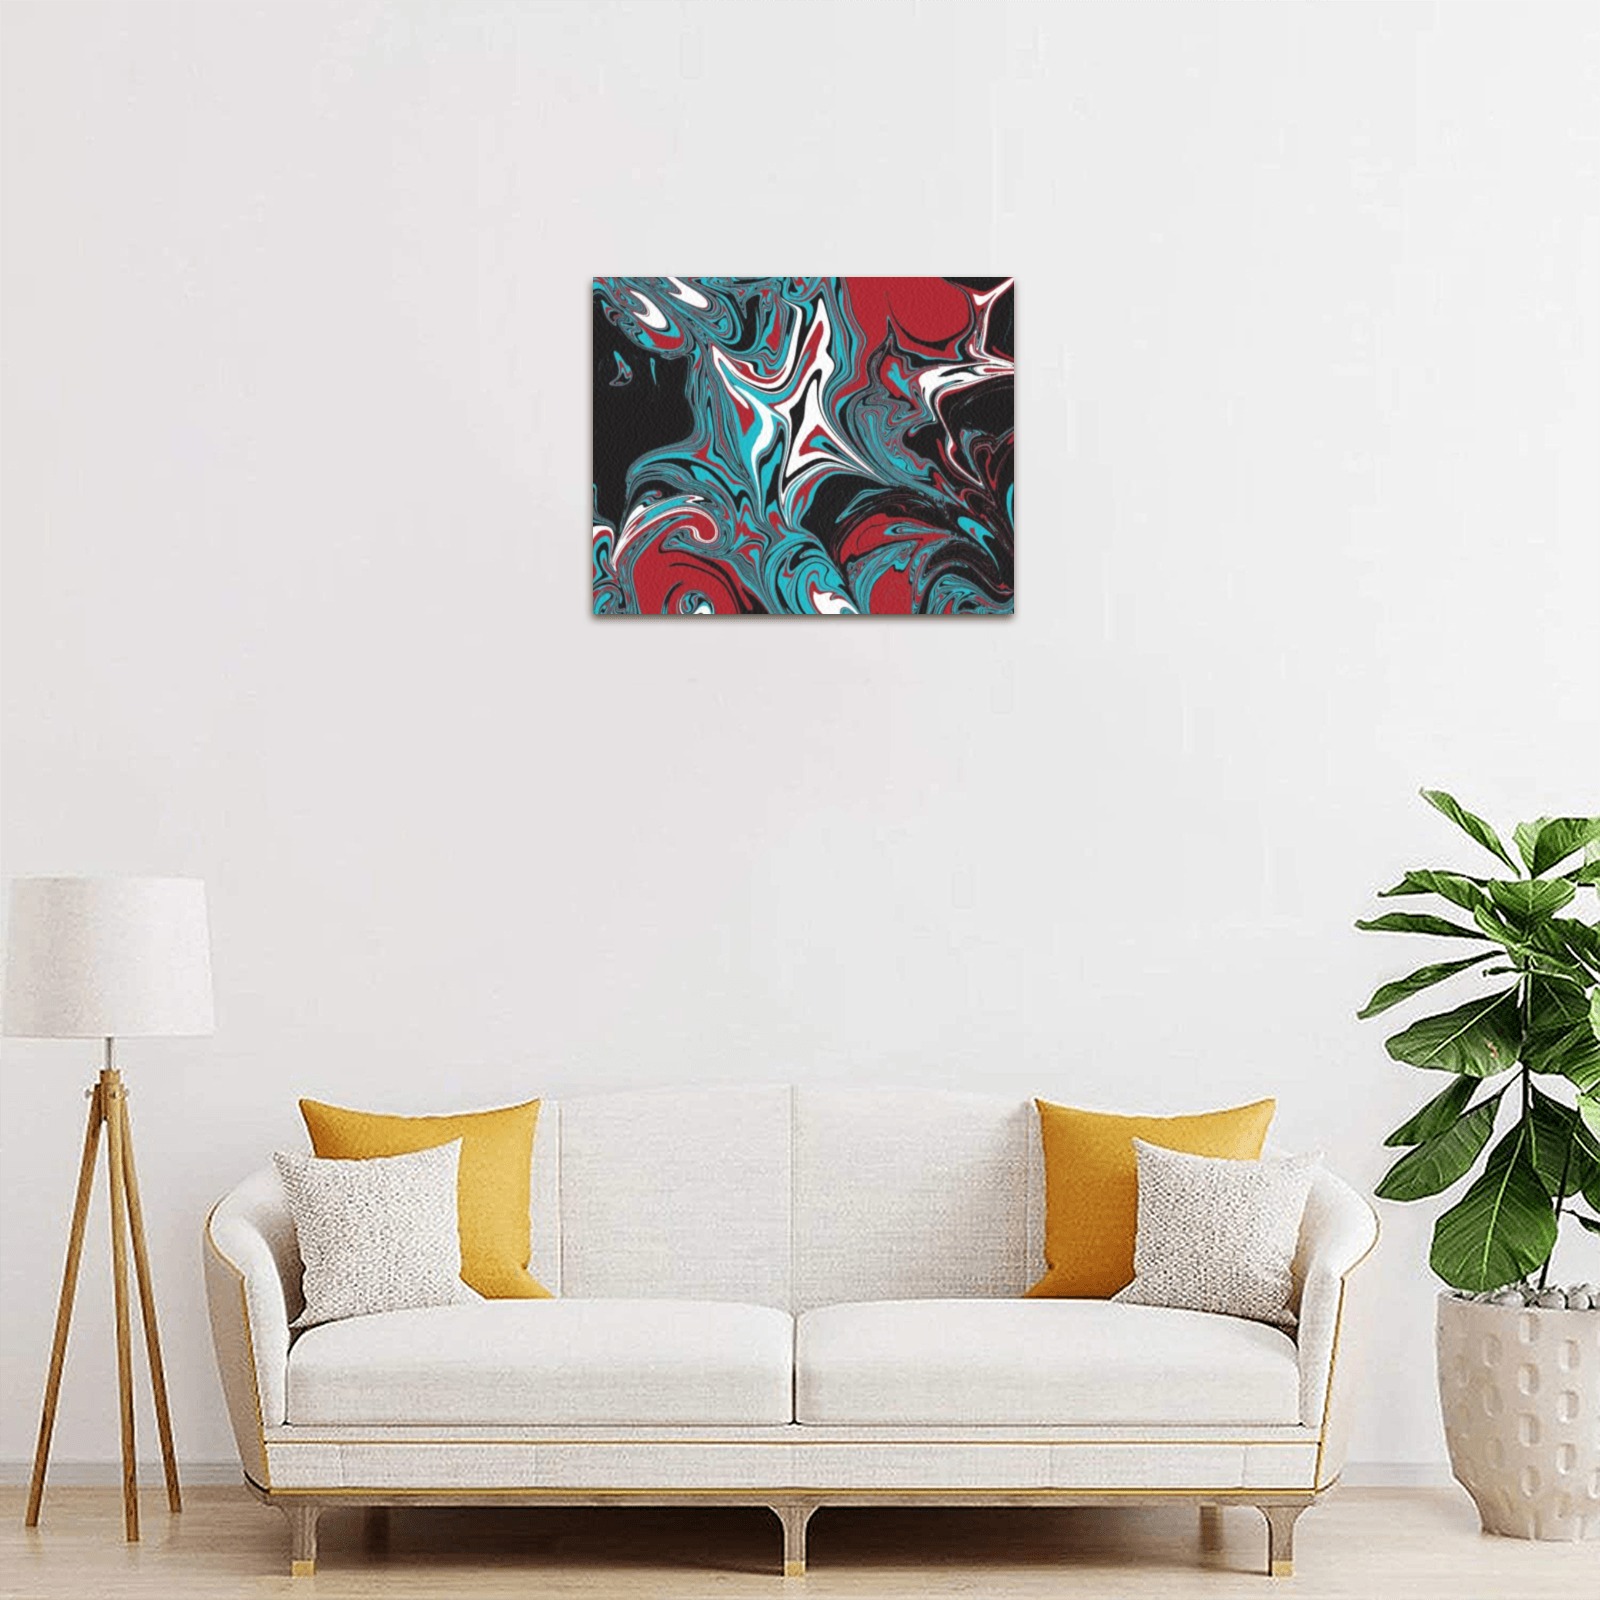 Dark Wave of Colors Frame Canvas Print 10"x8"